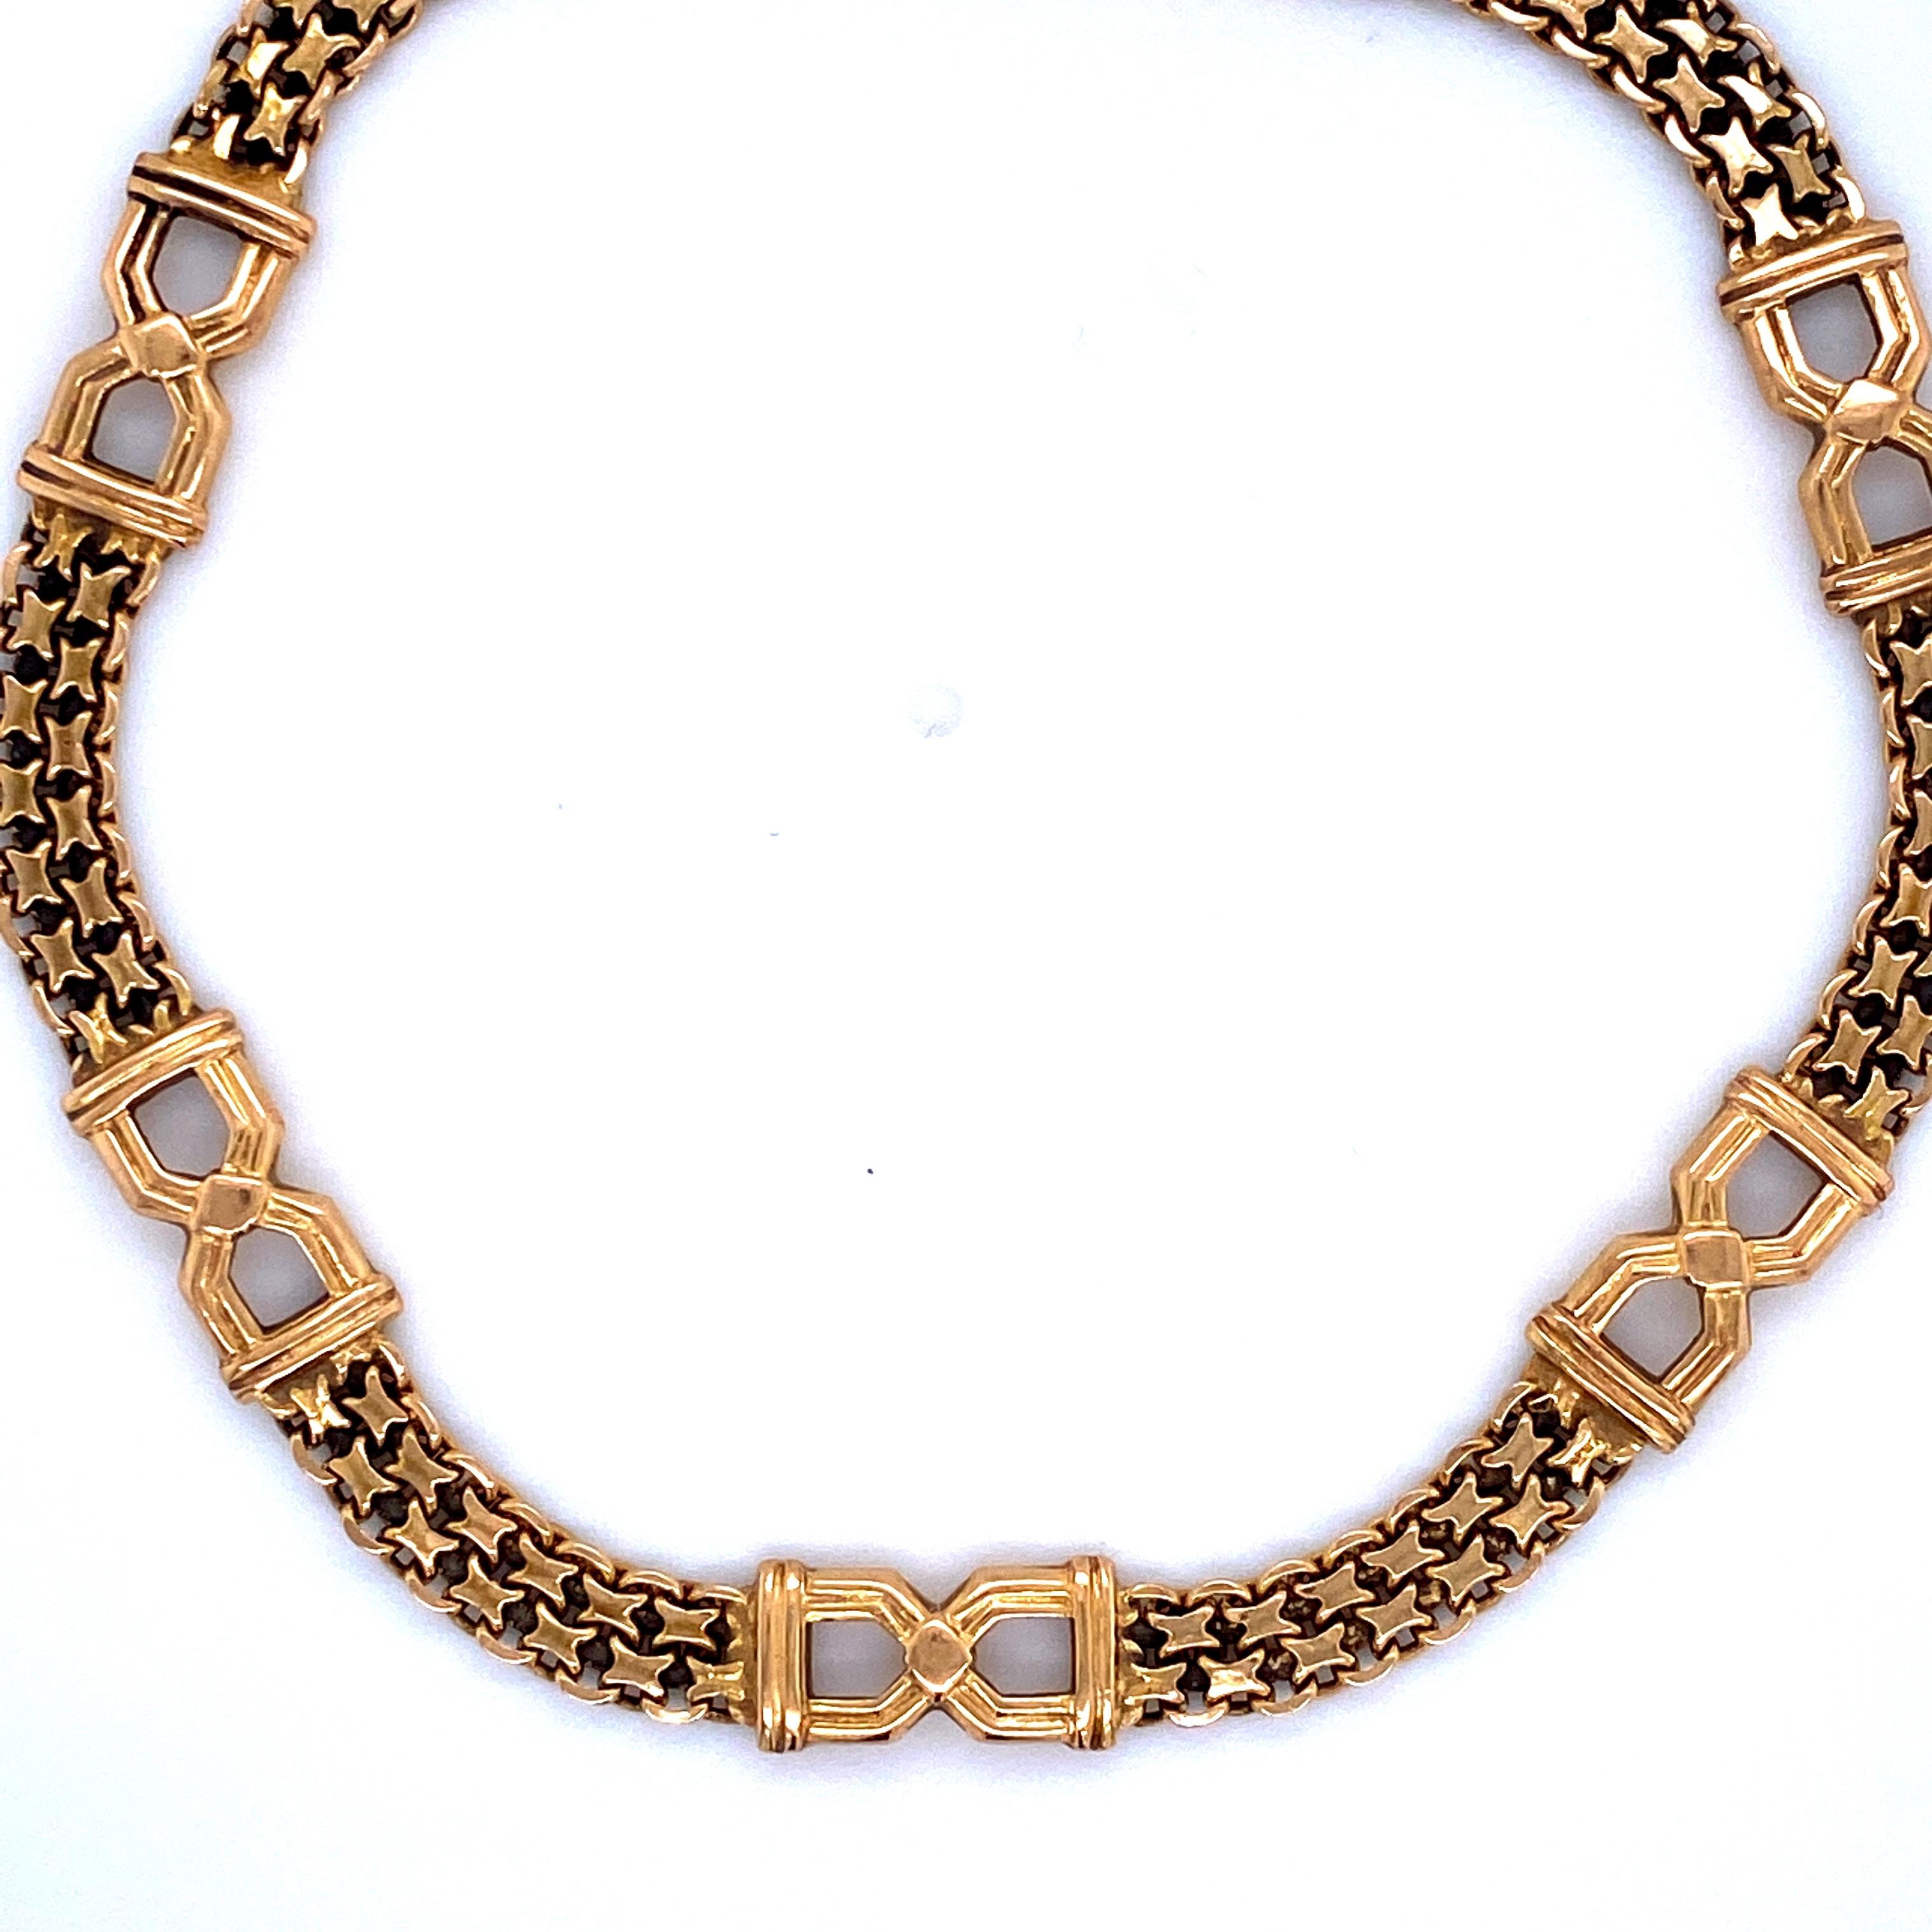 Vintage 14k yellow gold bracelet featuring two rolls of link chain with black enamel and 5 bow like links. Made in Italy 